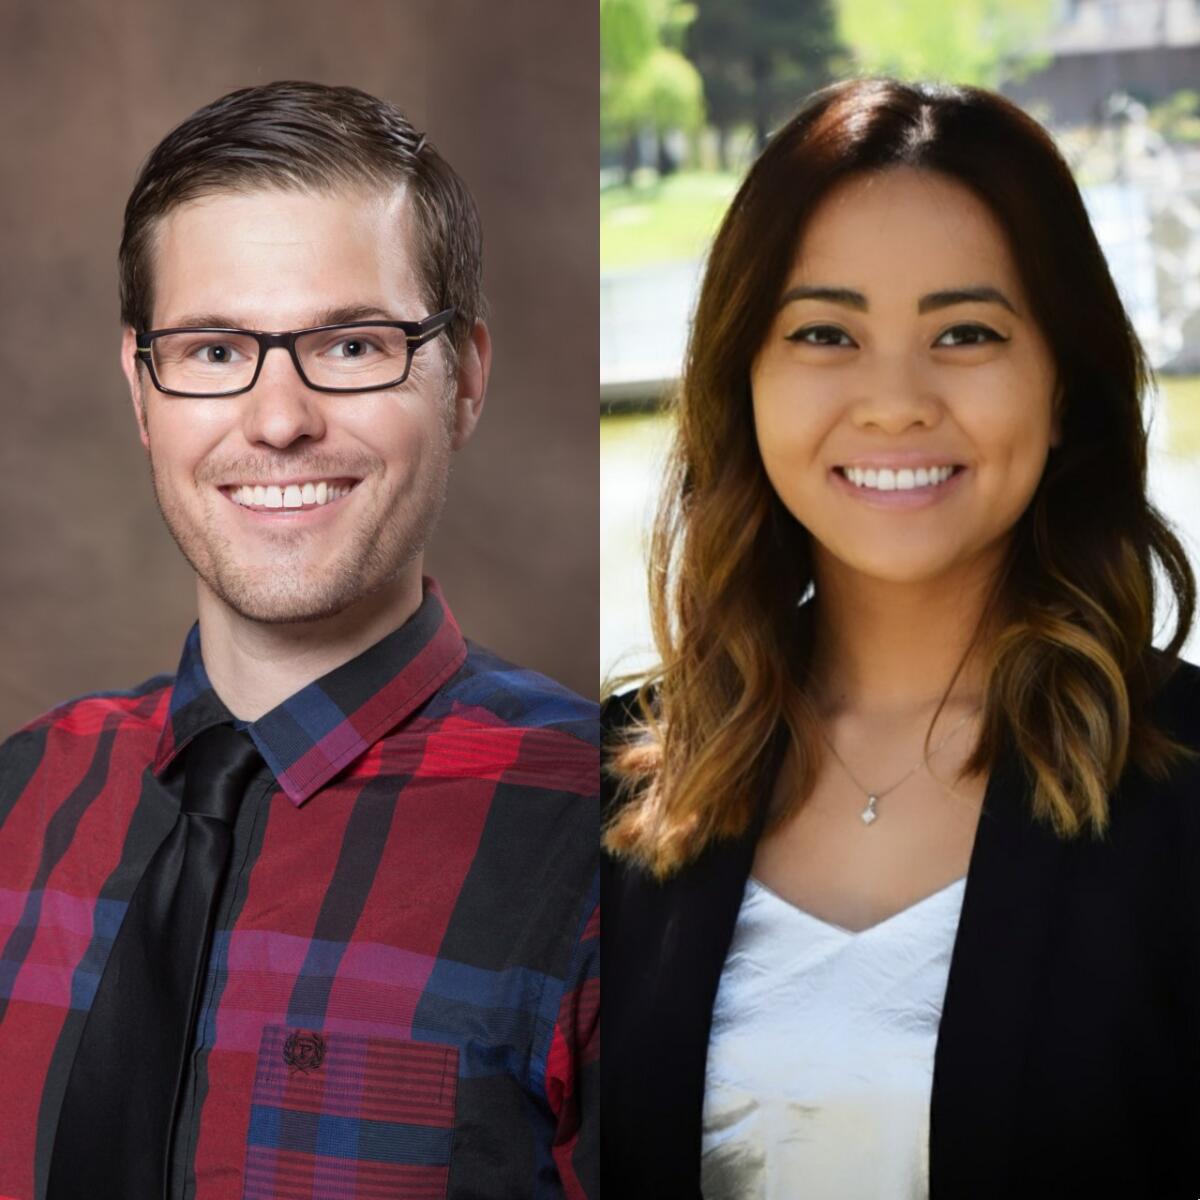 Dr. Ryan Roemer and Dr. Theresa Cao work in Mission Hospital of Mission Viejo's ASPIRE program for adolescent mental health.